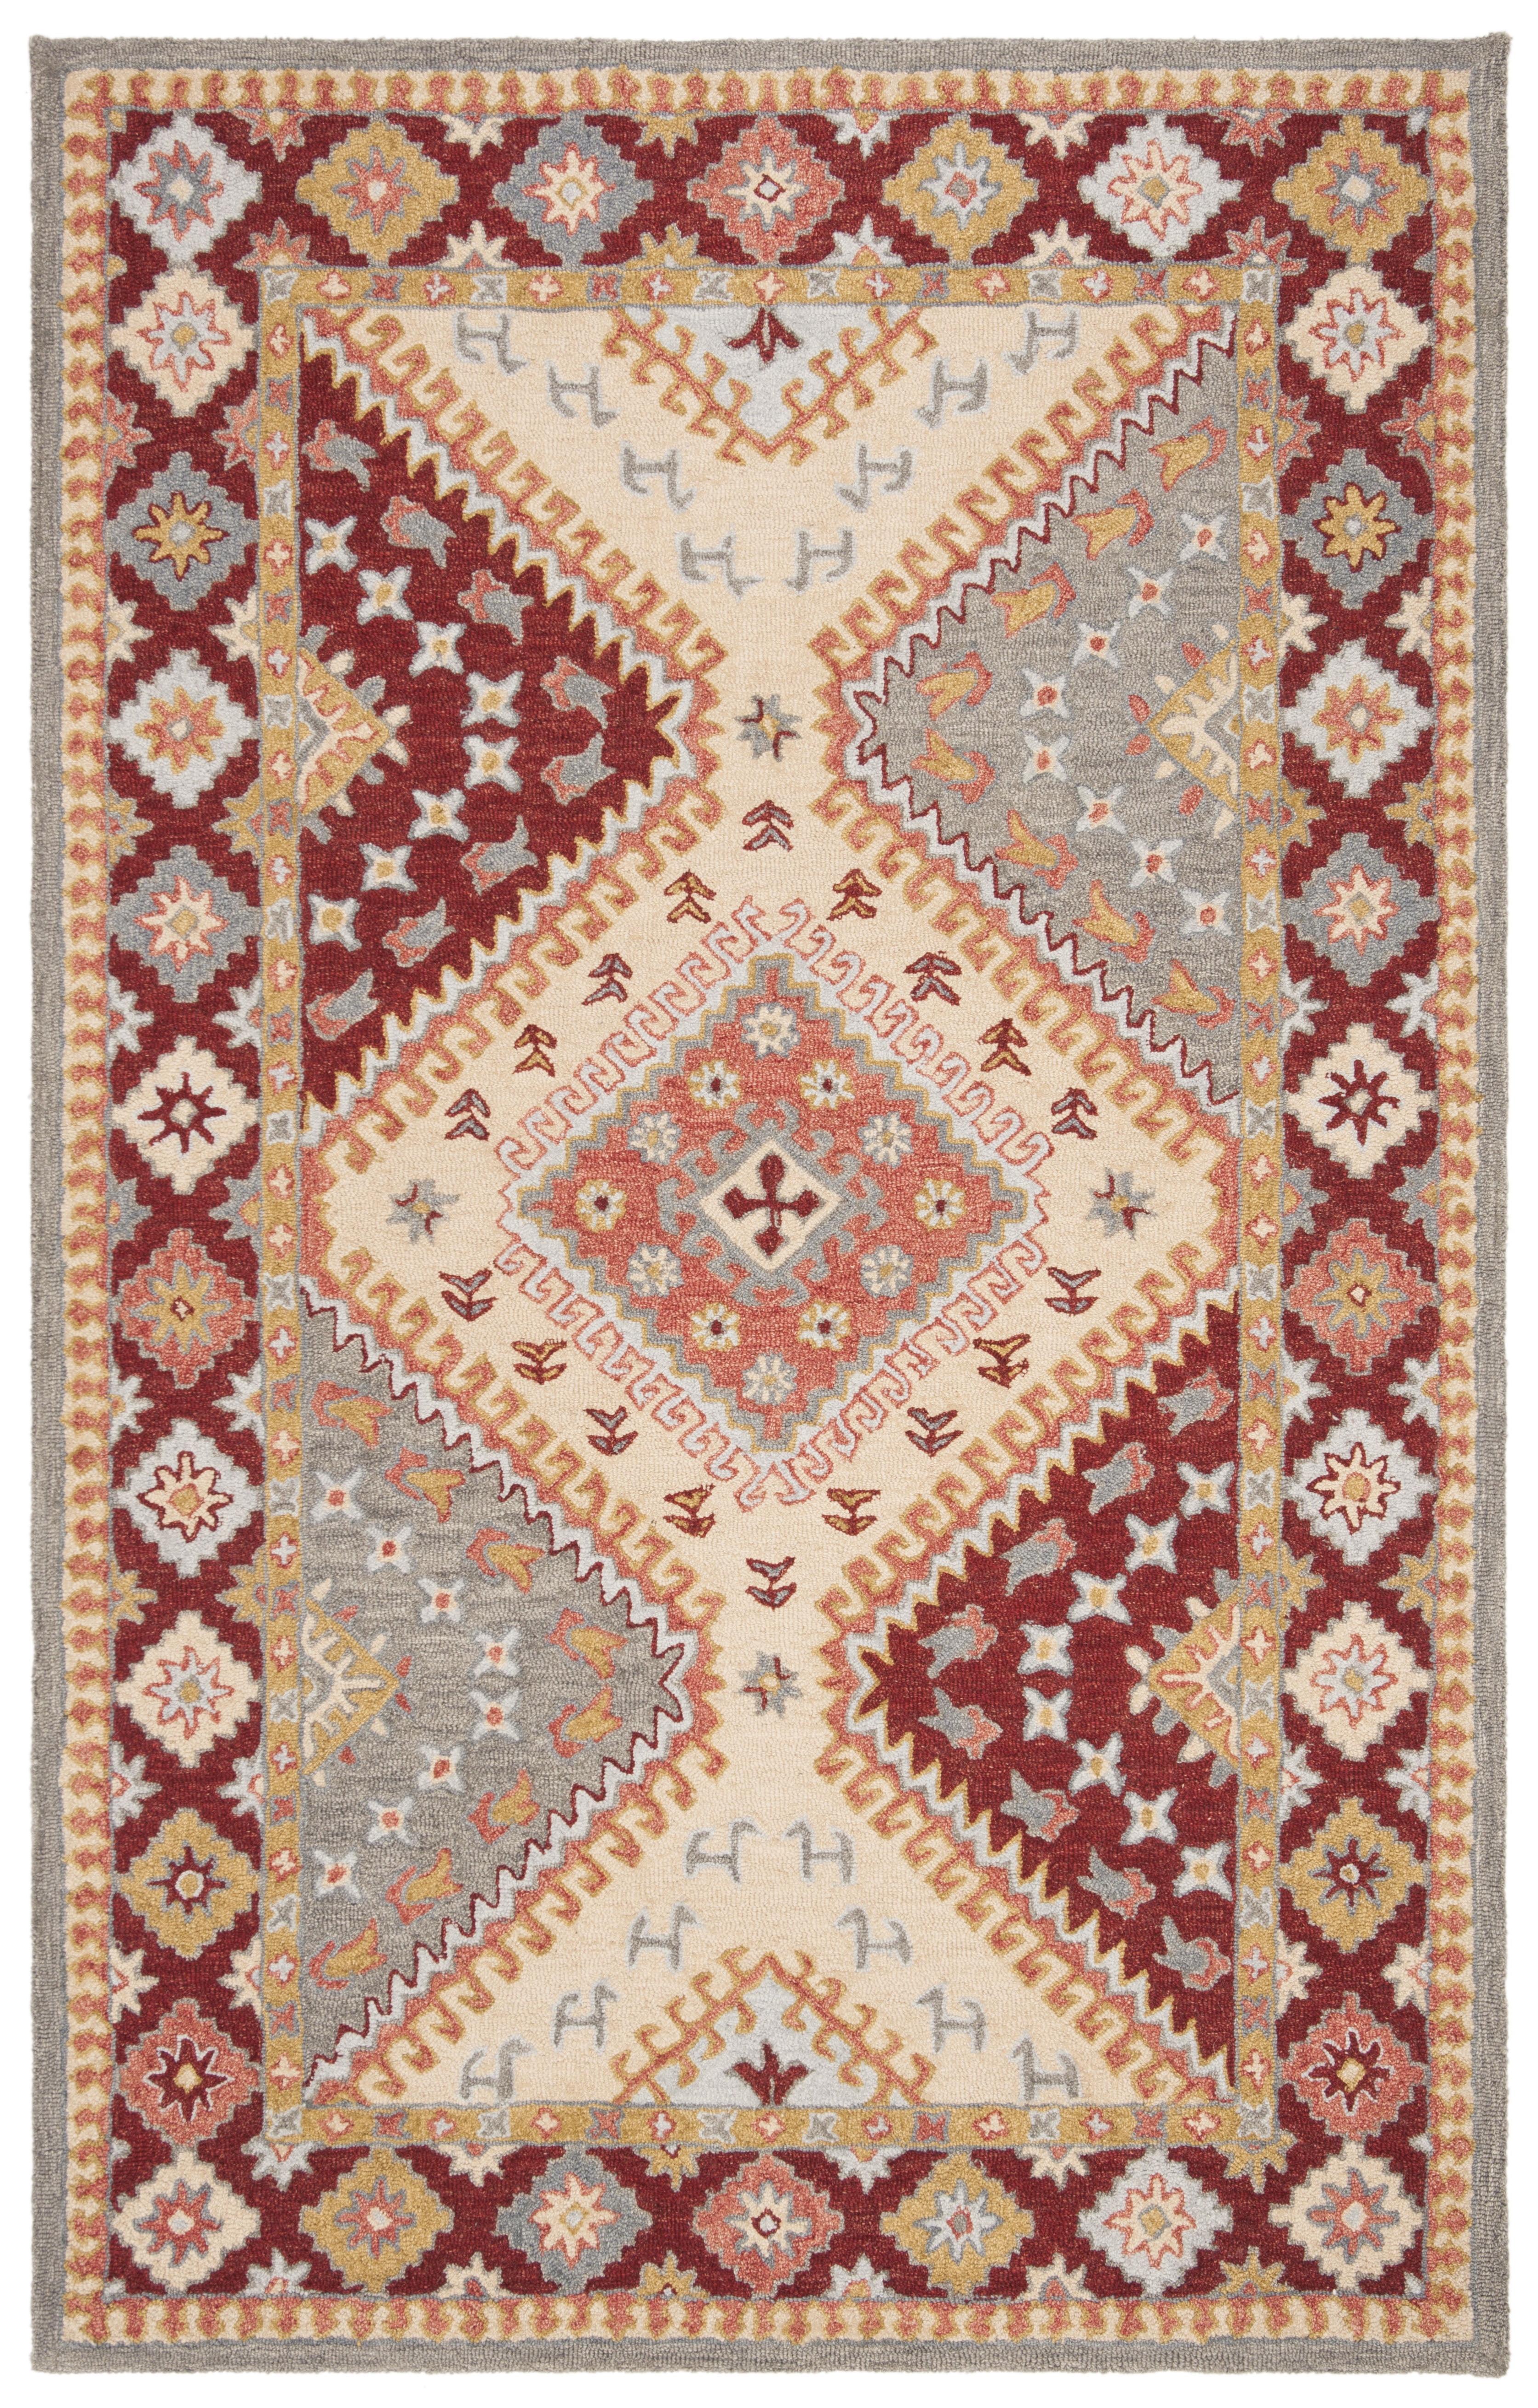 Rustic-Chic Red & Ivory Handmade Wool Area Rug 4' x 6'